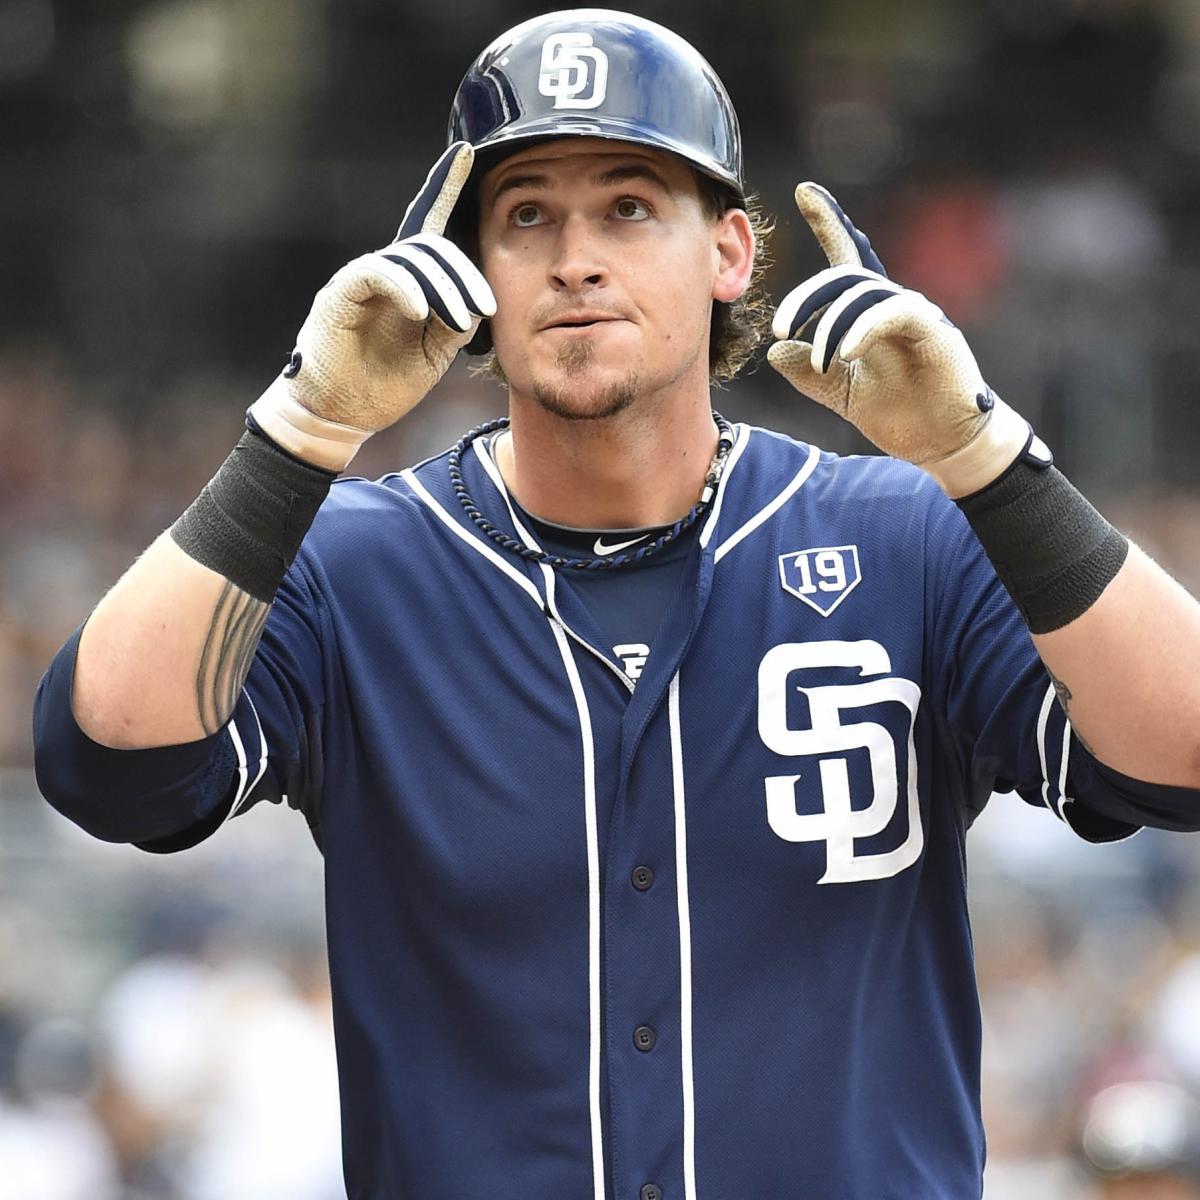 The Yasmani Grandal situation has come to a head – Dodgers Digest